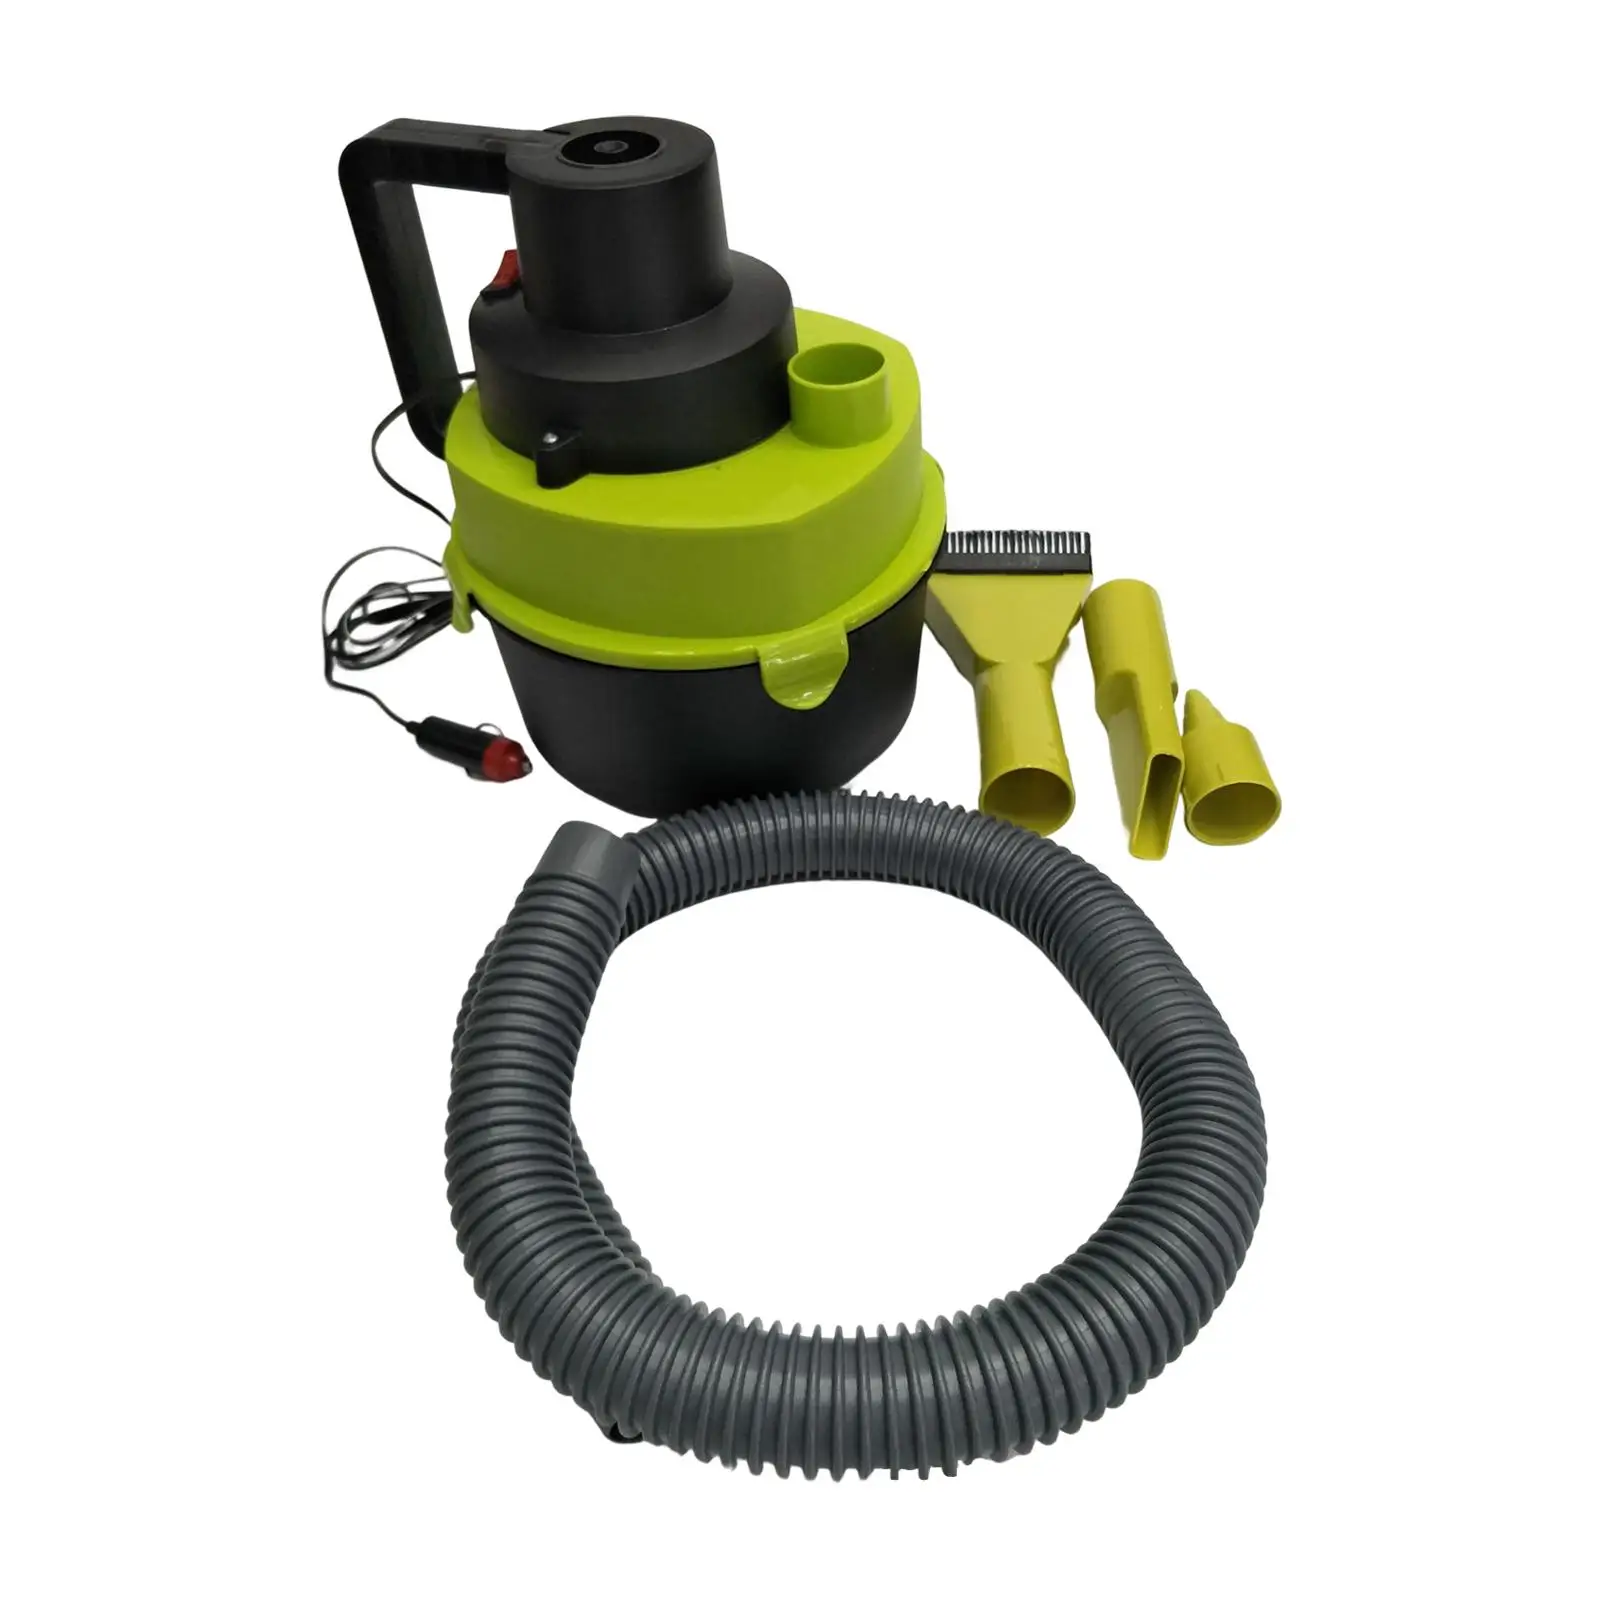 Portable Shop Vacuum with Attachments Blowing Function Dry Garbage Handheld dry wet Vacuum for Workshop Garage Corners Home RV